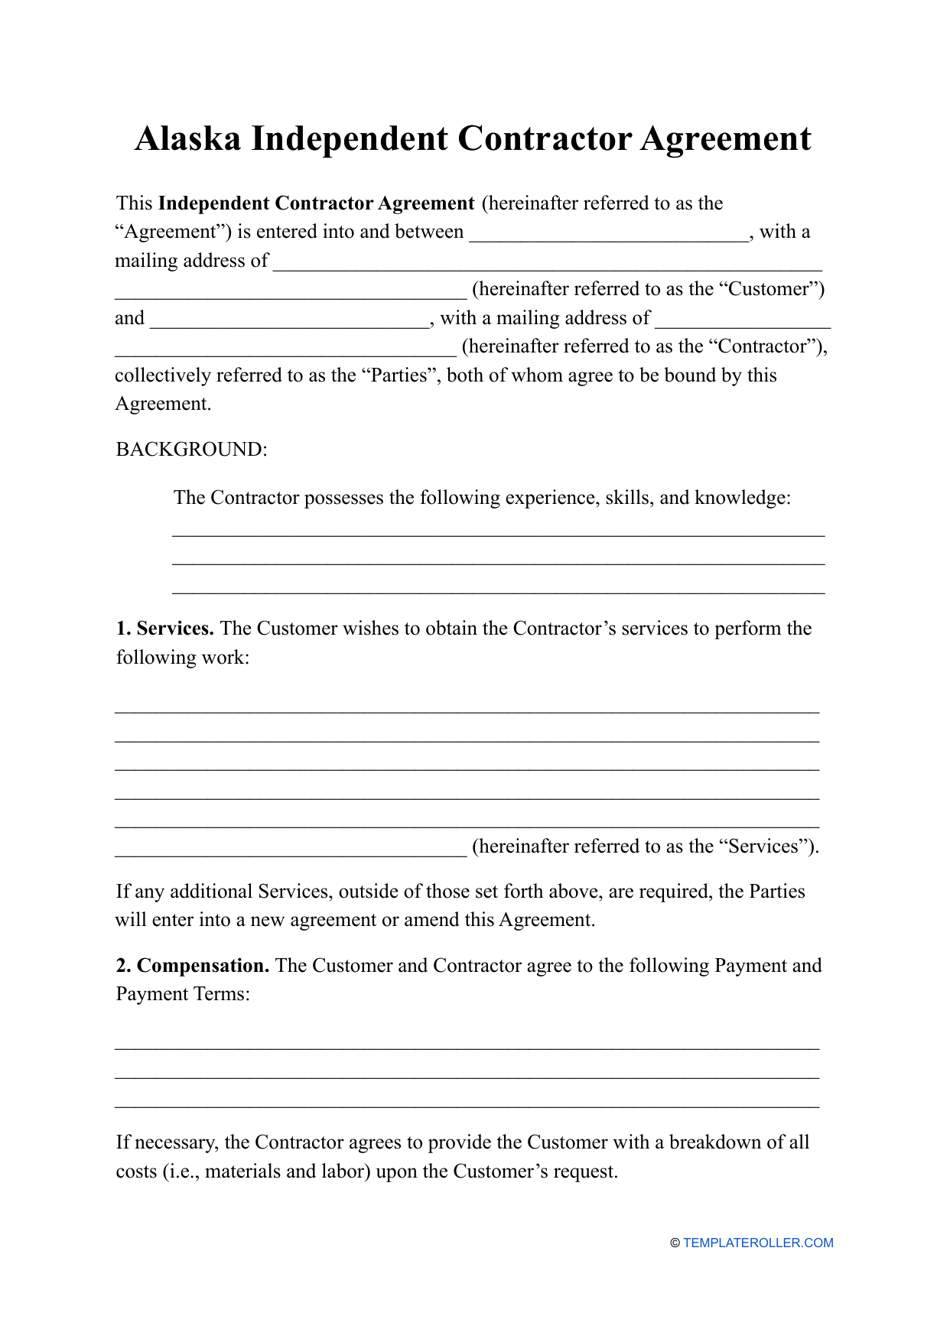 Independent Contractor Agreement Template - Alaska, Page 1